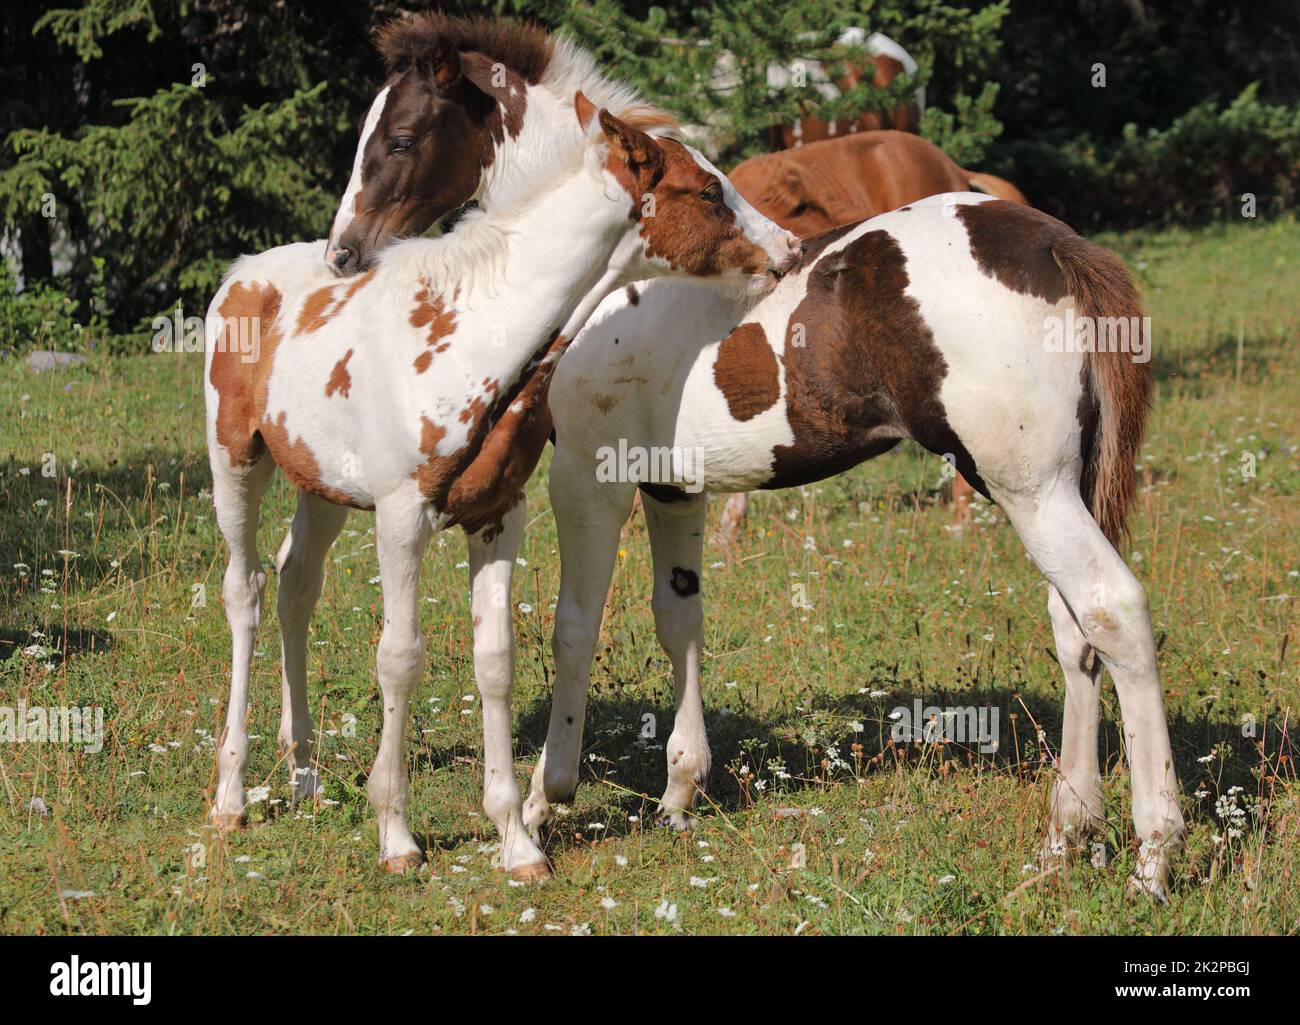 Two skewbald foals are playing together and are grooming together, social interaction between cute young horses Stock Photo